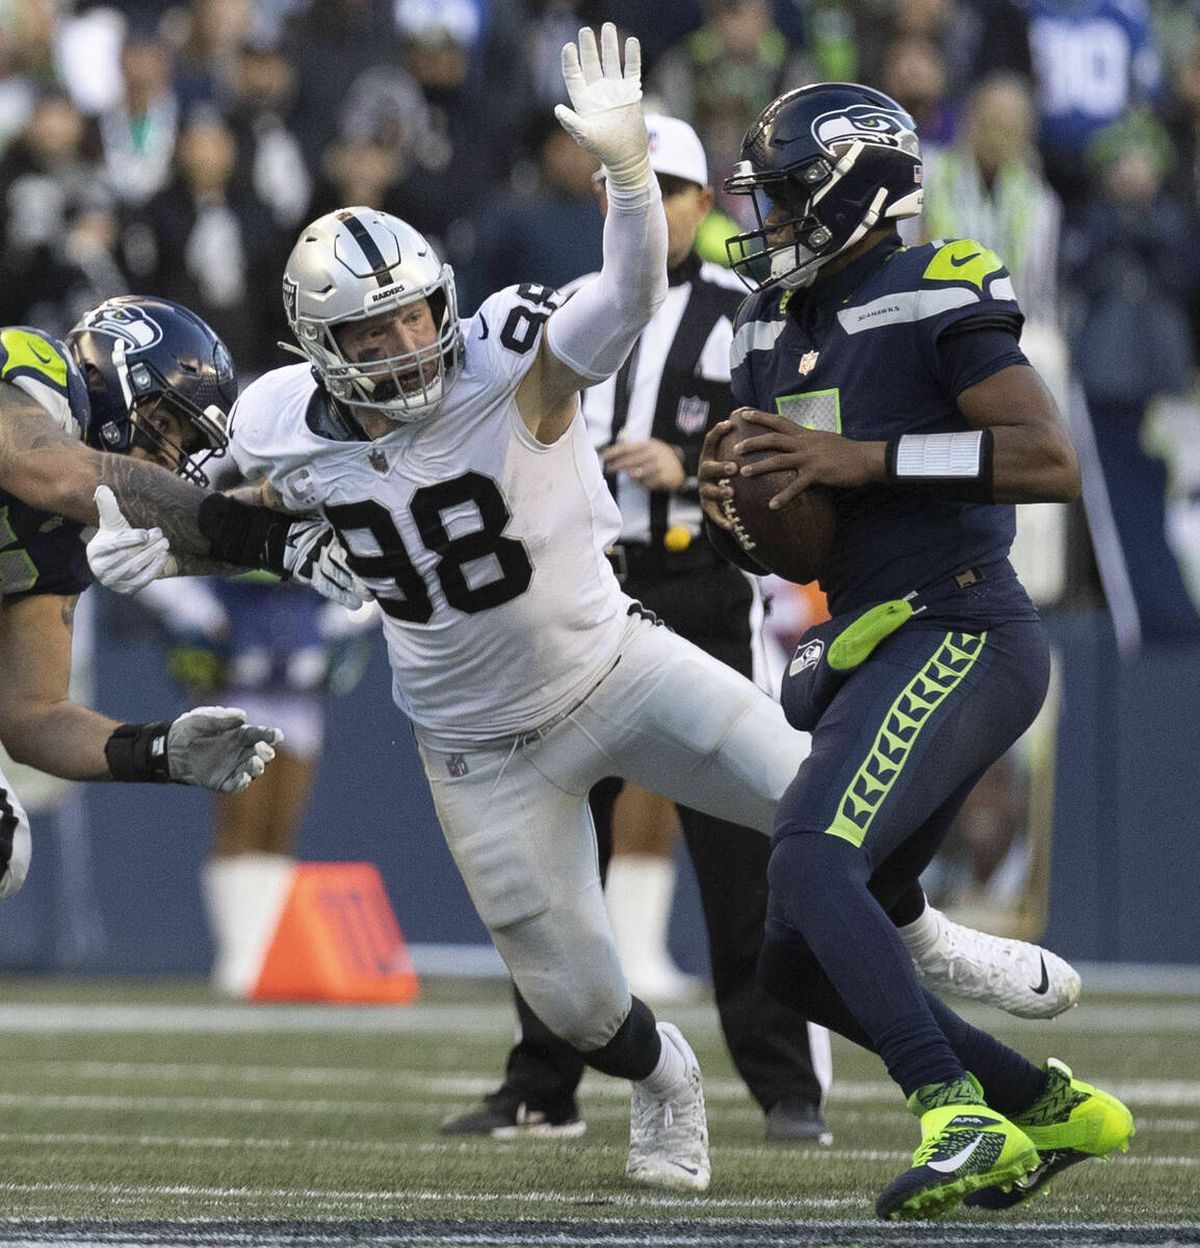 Raiders defensive end Maxx Crosby (98) looks to defend a pass from Seattle Seahawks quarterback Geno Smith (7) during the second half of an NFL game at Lumen Field on Sunday, Nov. 27, 2022, in Seattle. (Heidi Fang/Las Vegas Review-Journal) @HeidiFang  (Heidi Fang)